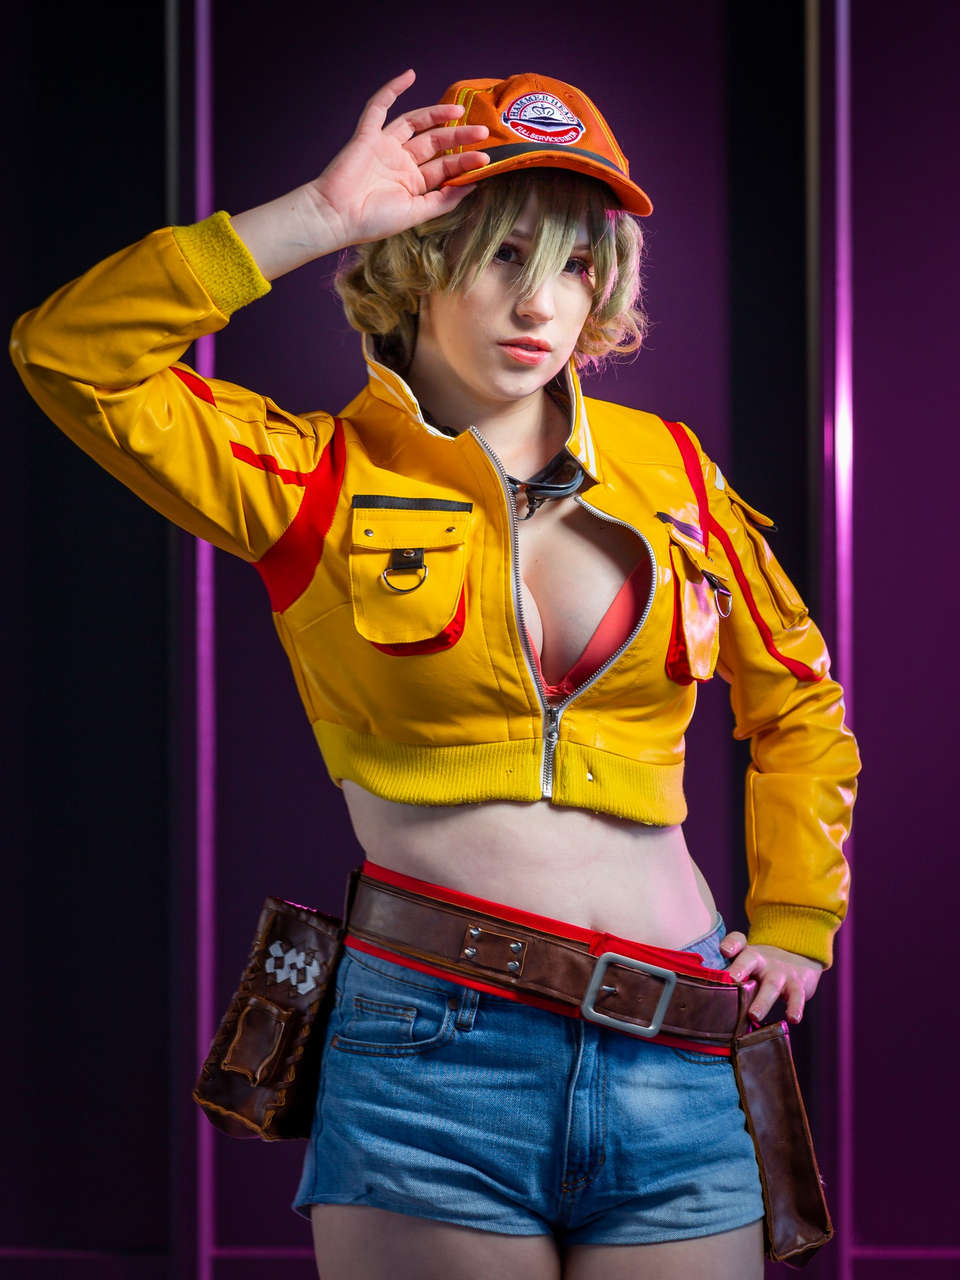 Cindy By Cosmic Orchi